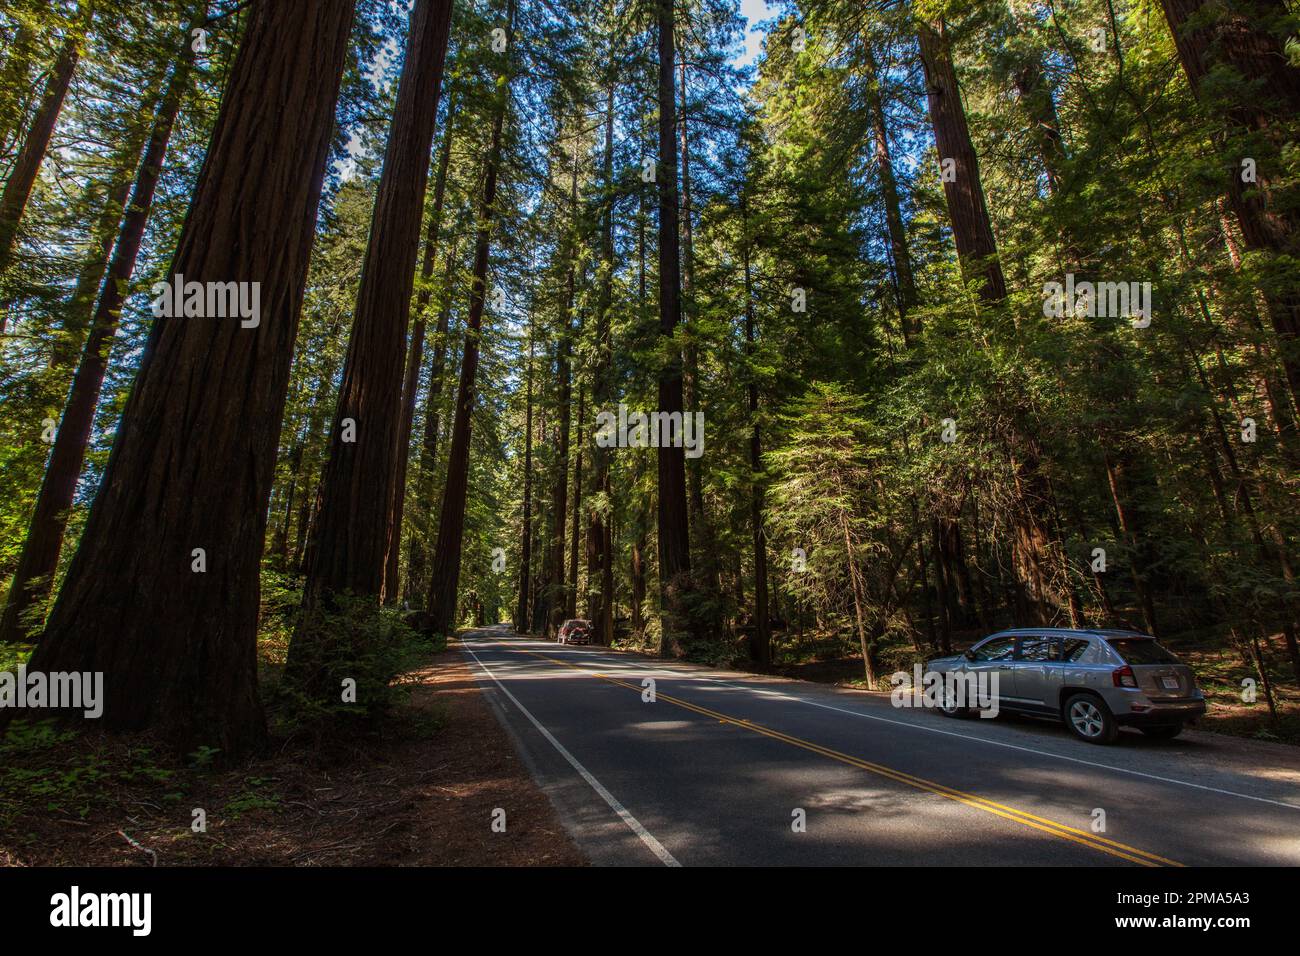 Avenue of the Giants, Humboldt State Park, California, USA Stock Photo